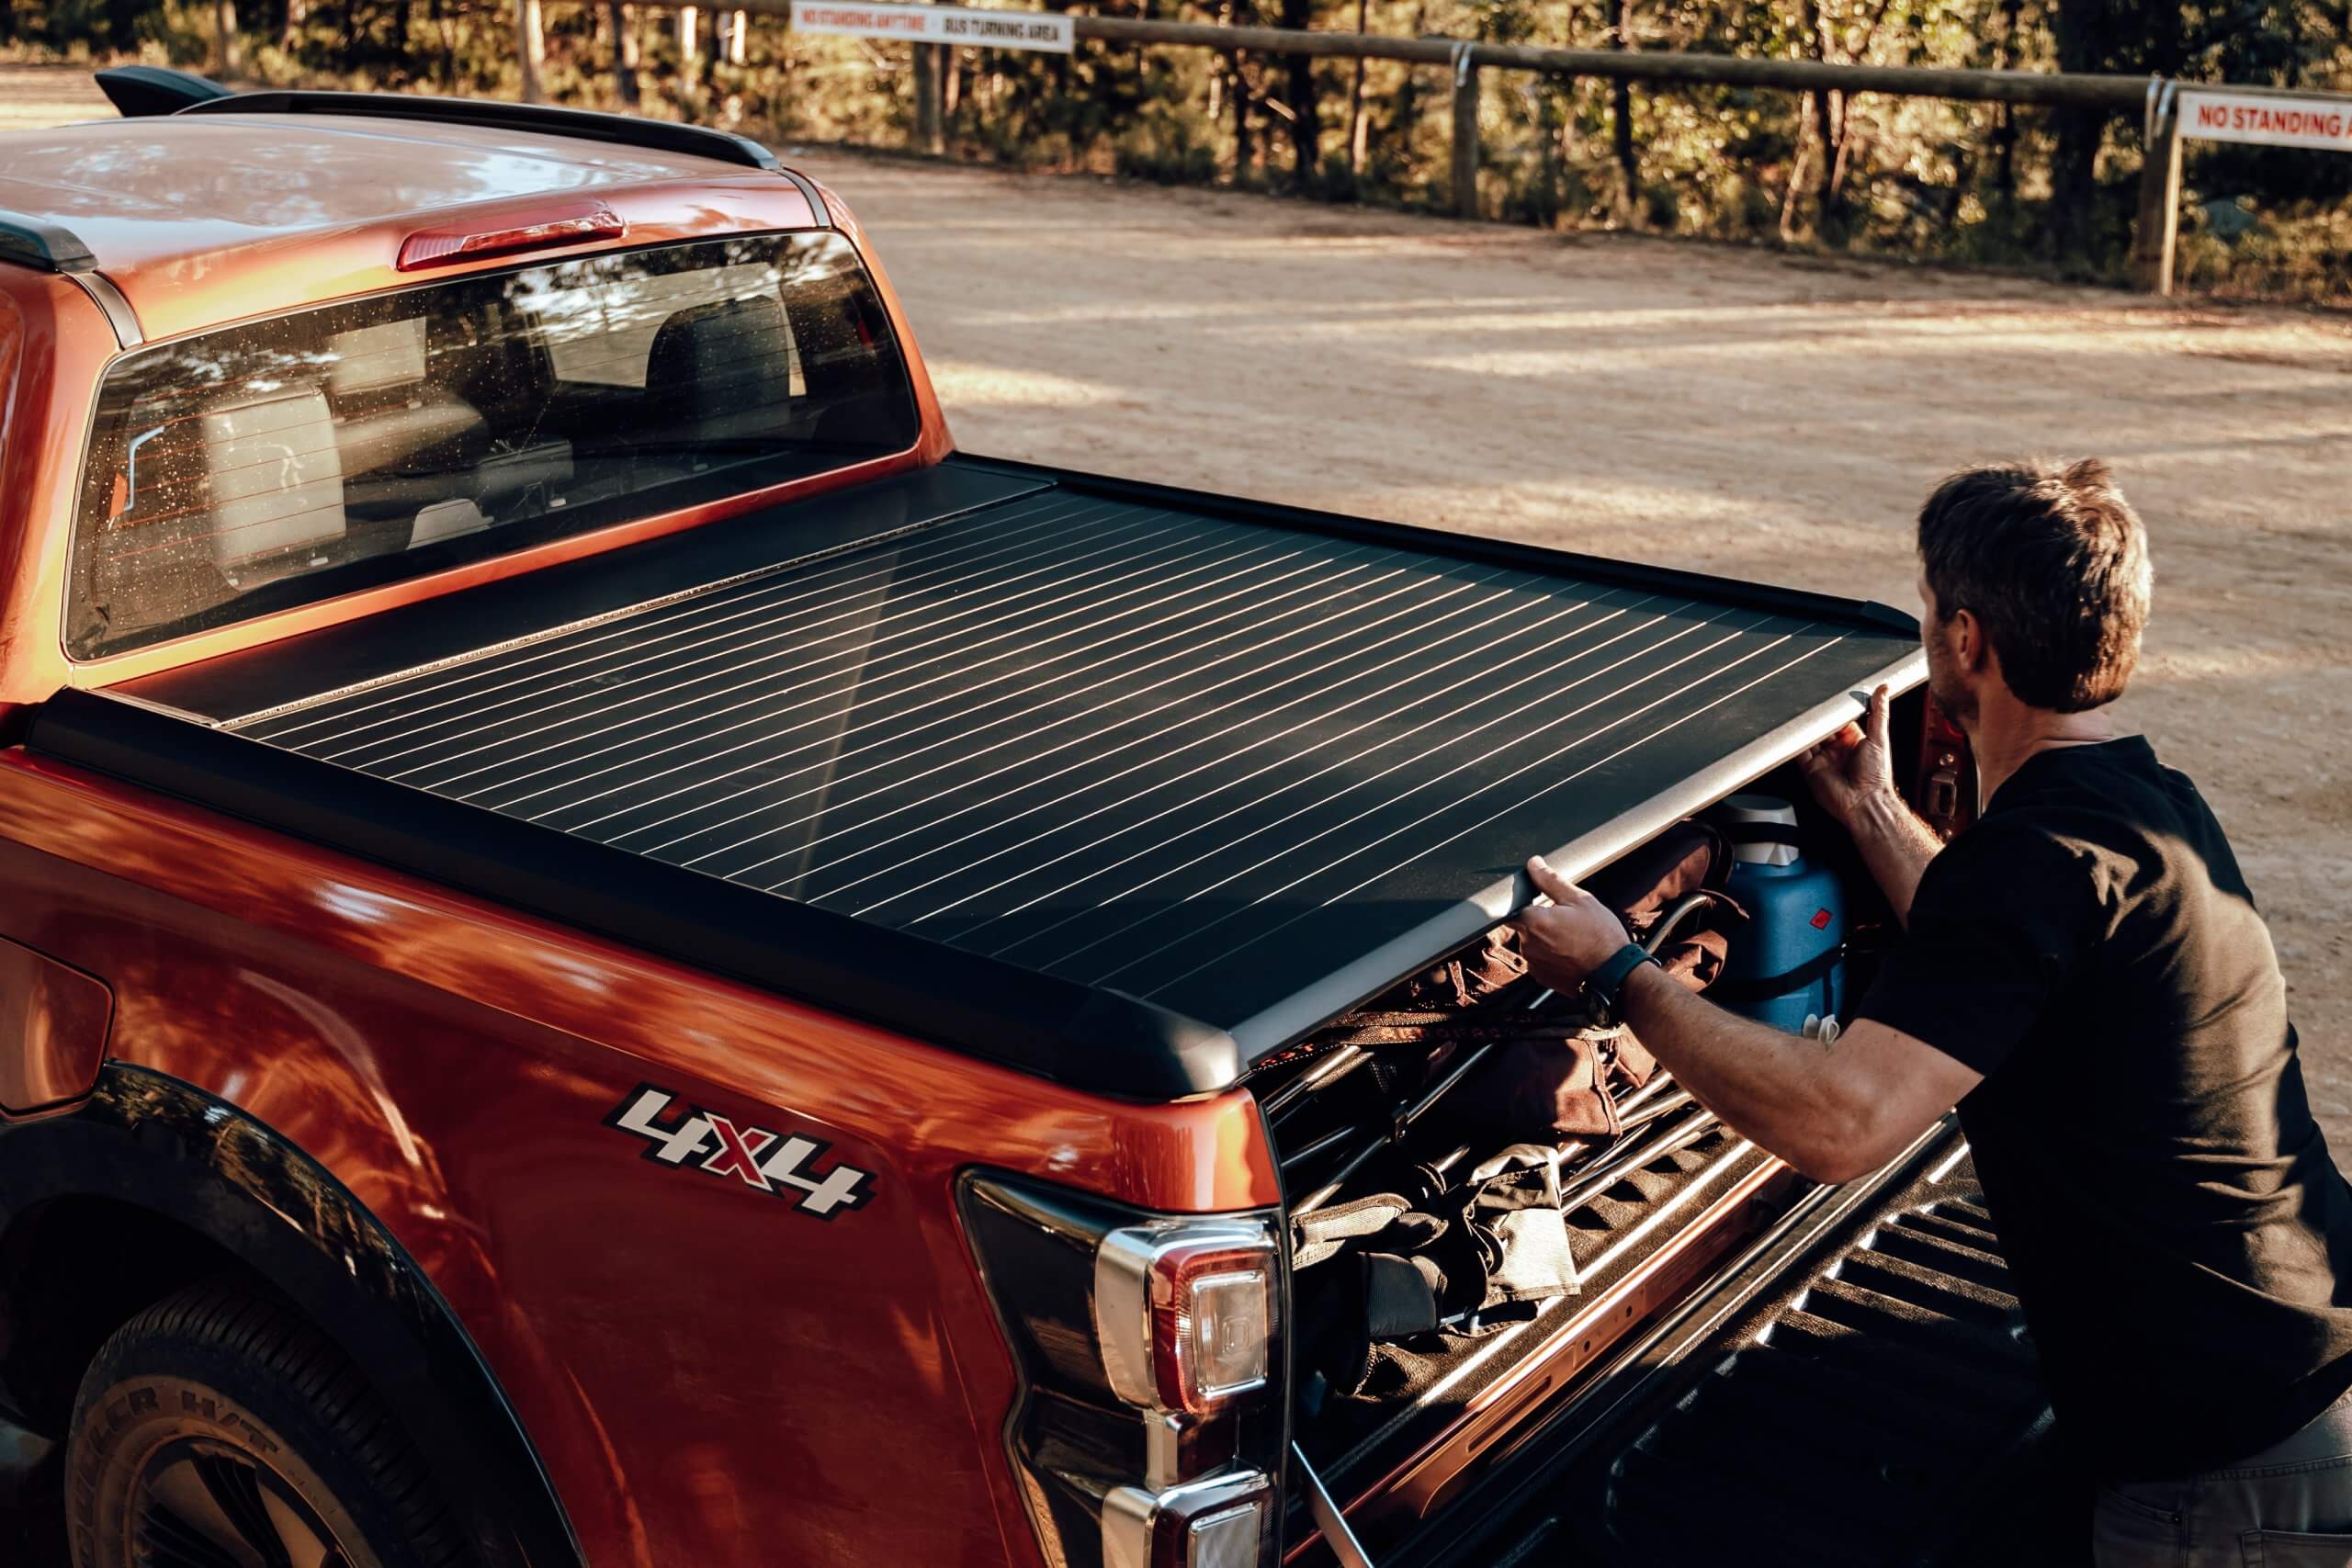 Transform Your Ute Tray Top Accessories for Utility and Style